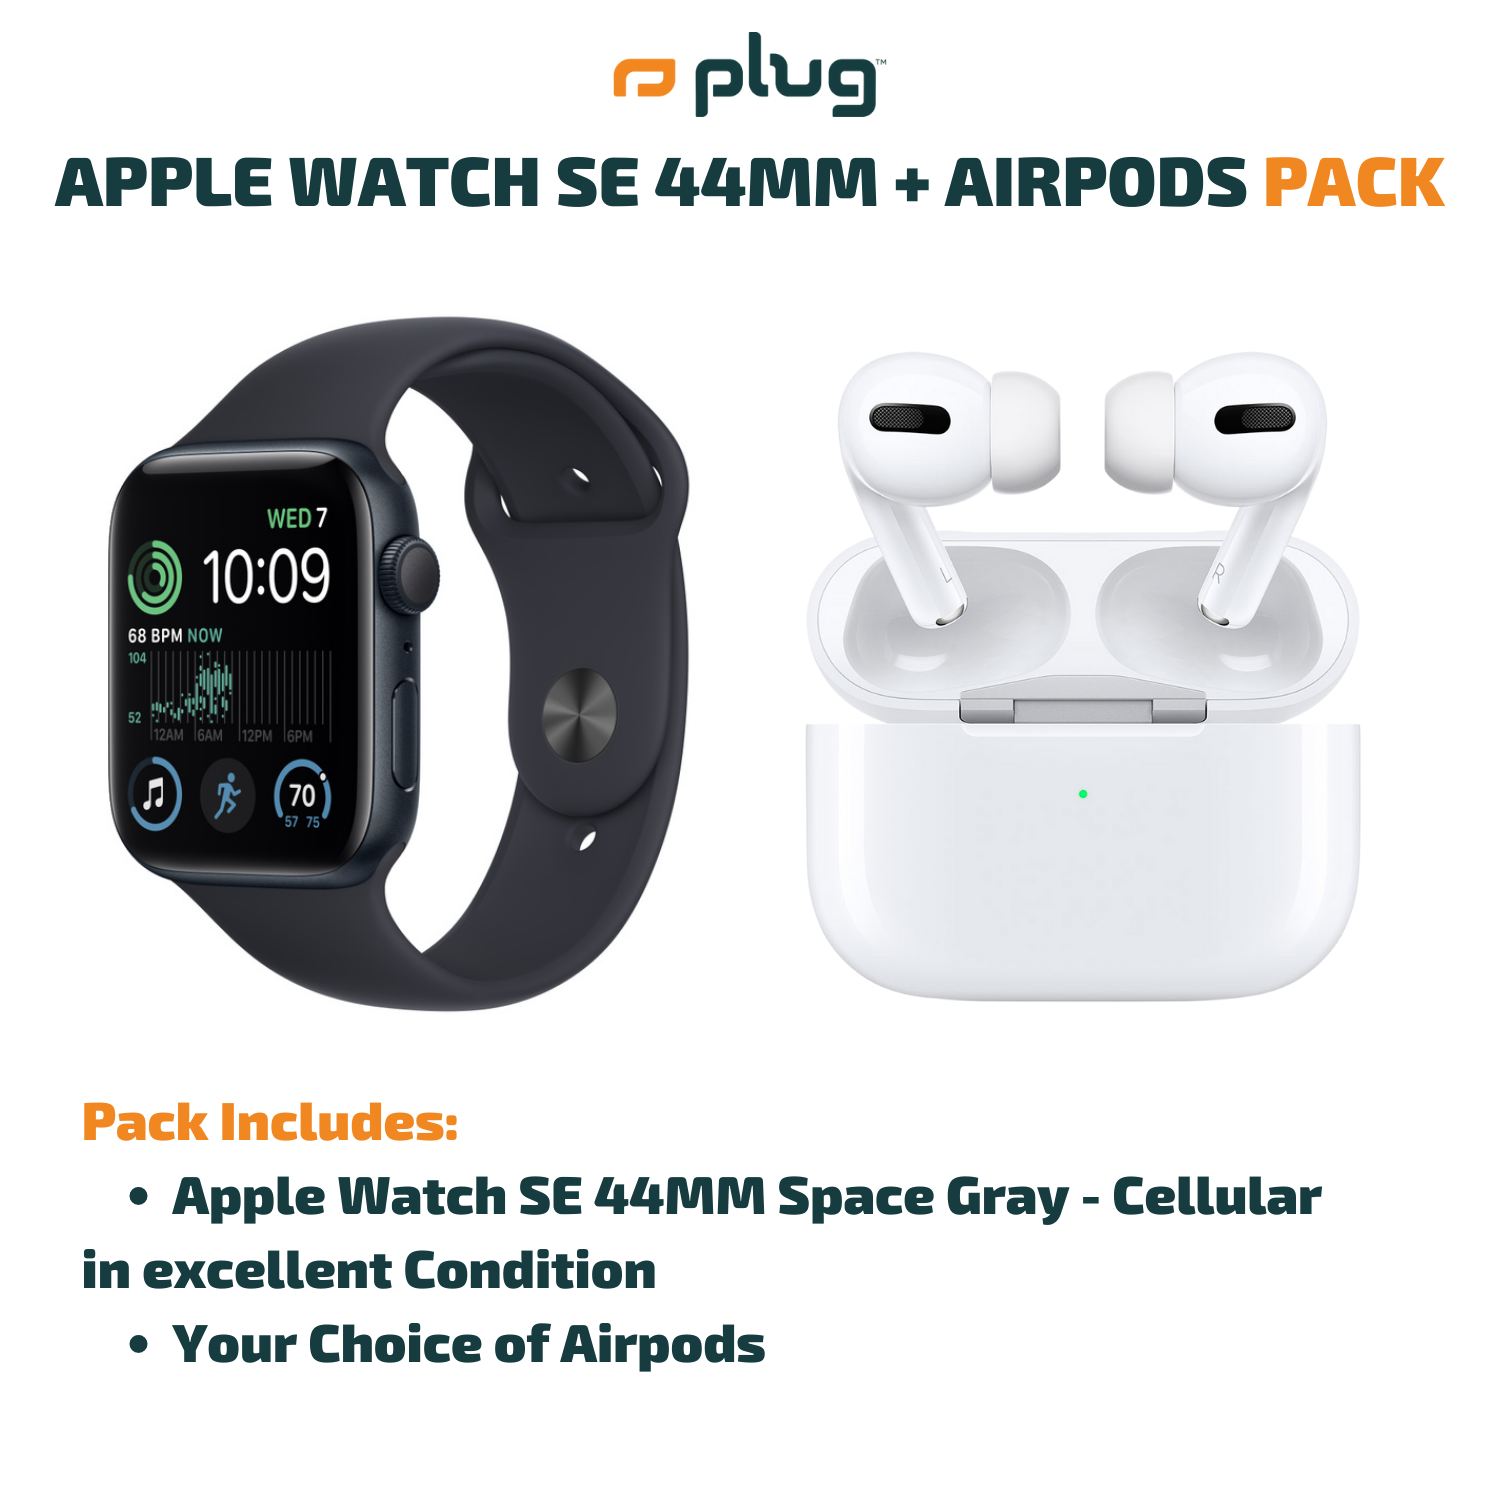 Apple Watch SE 44MM + Pack Airpods